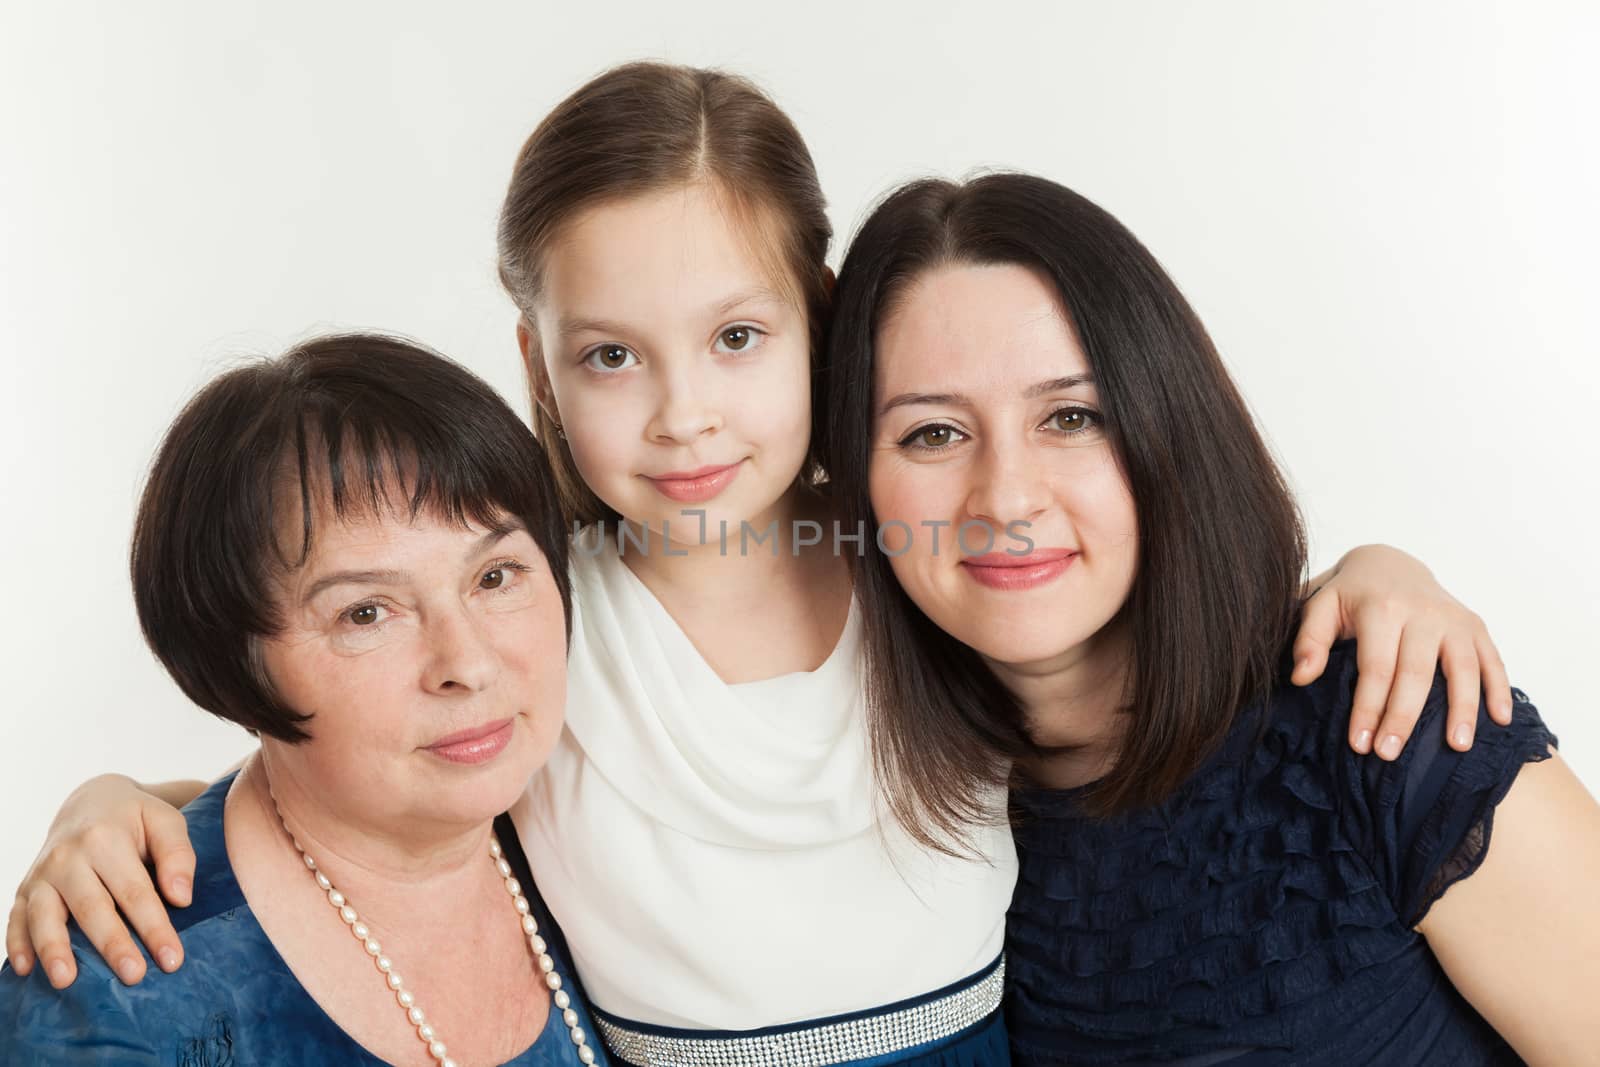 The granddaughter embraces the grandmother and mother  by sveter